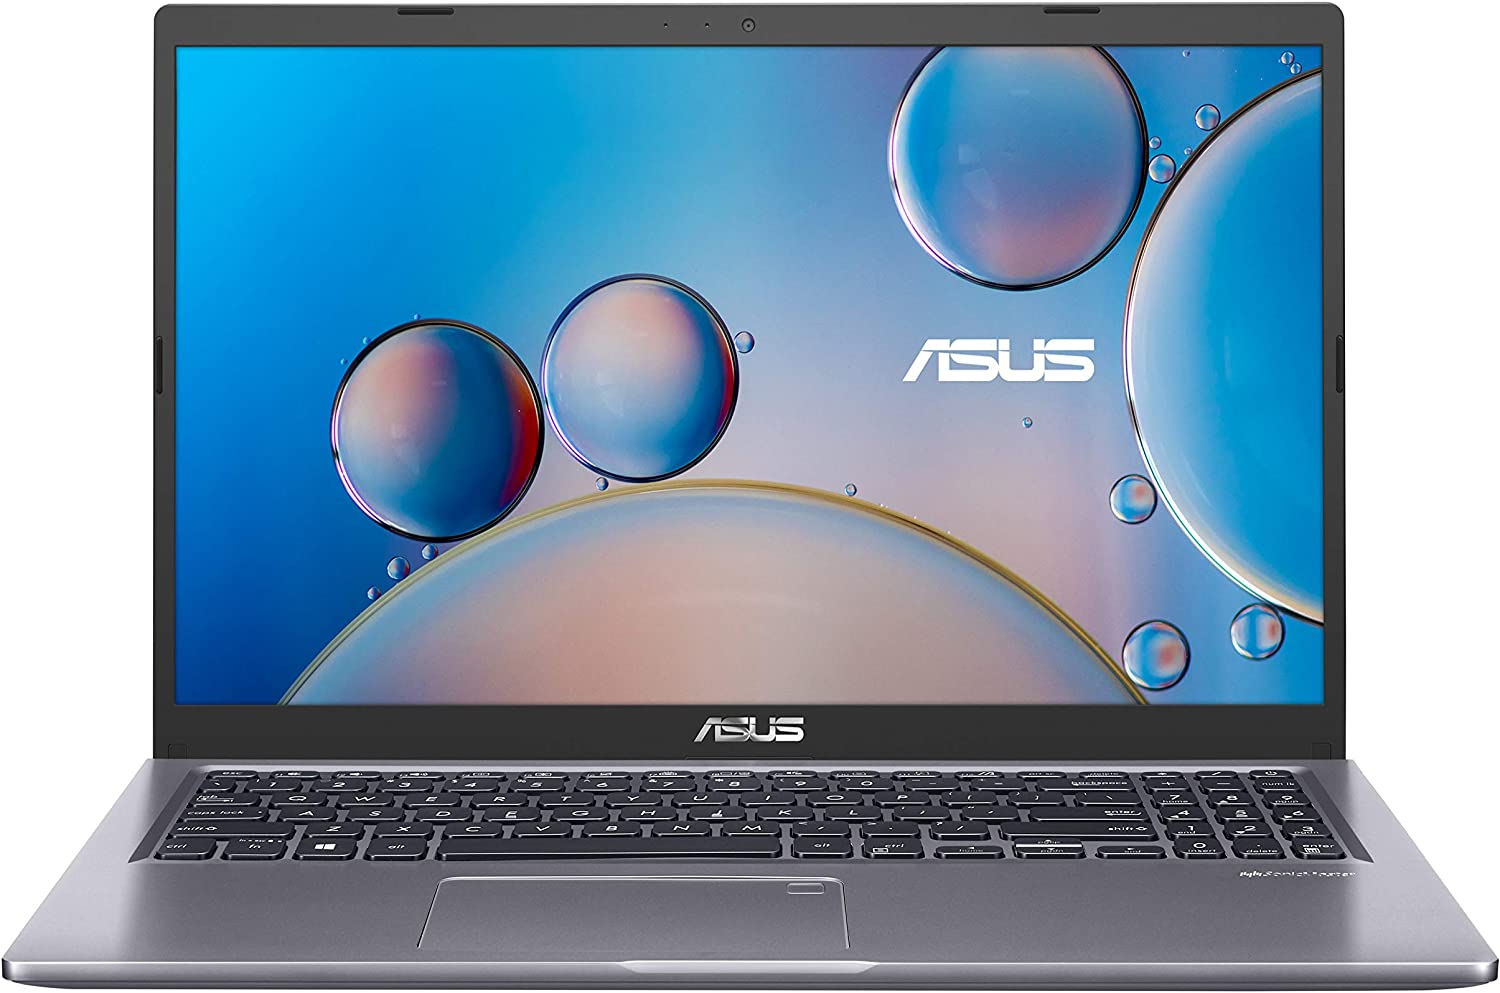 ASUS VivoBook 15 F515 Thin and Light Laptop, 15.6” FHD [...]